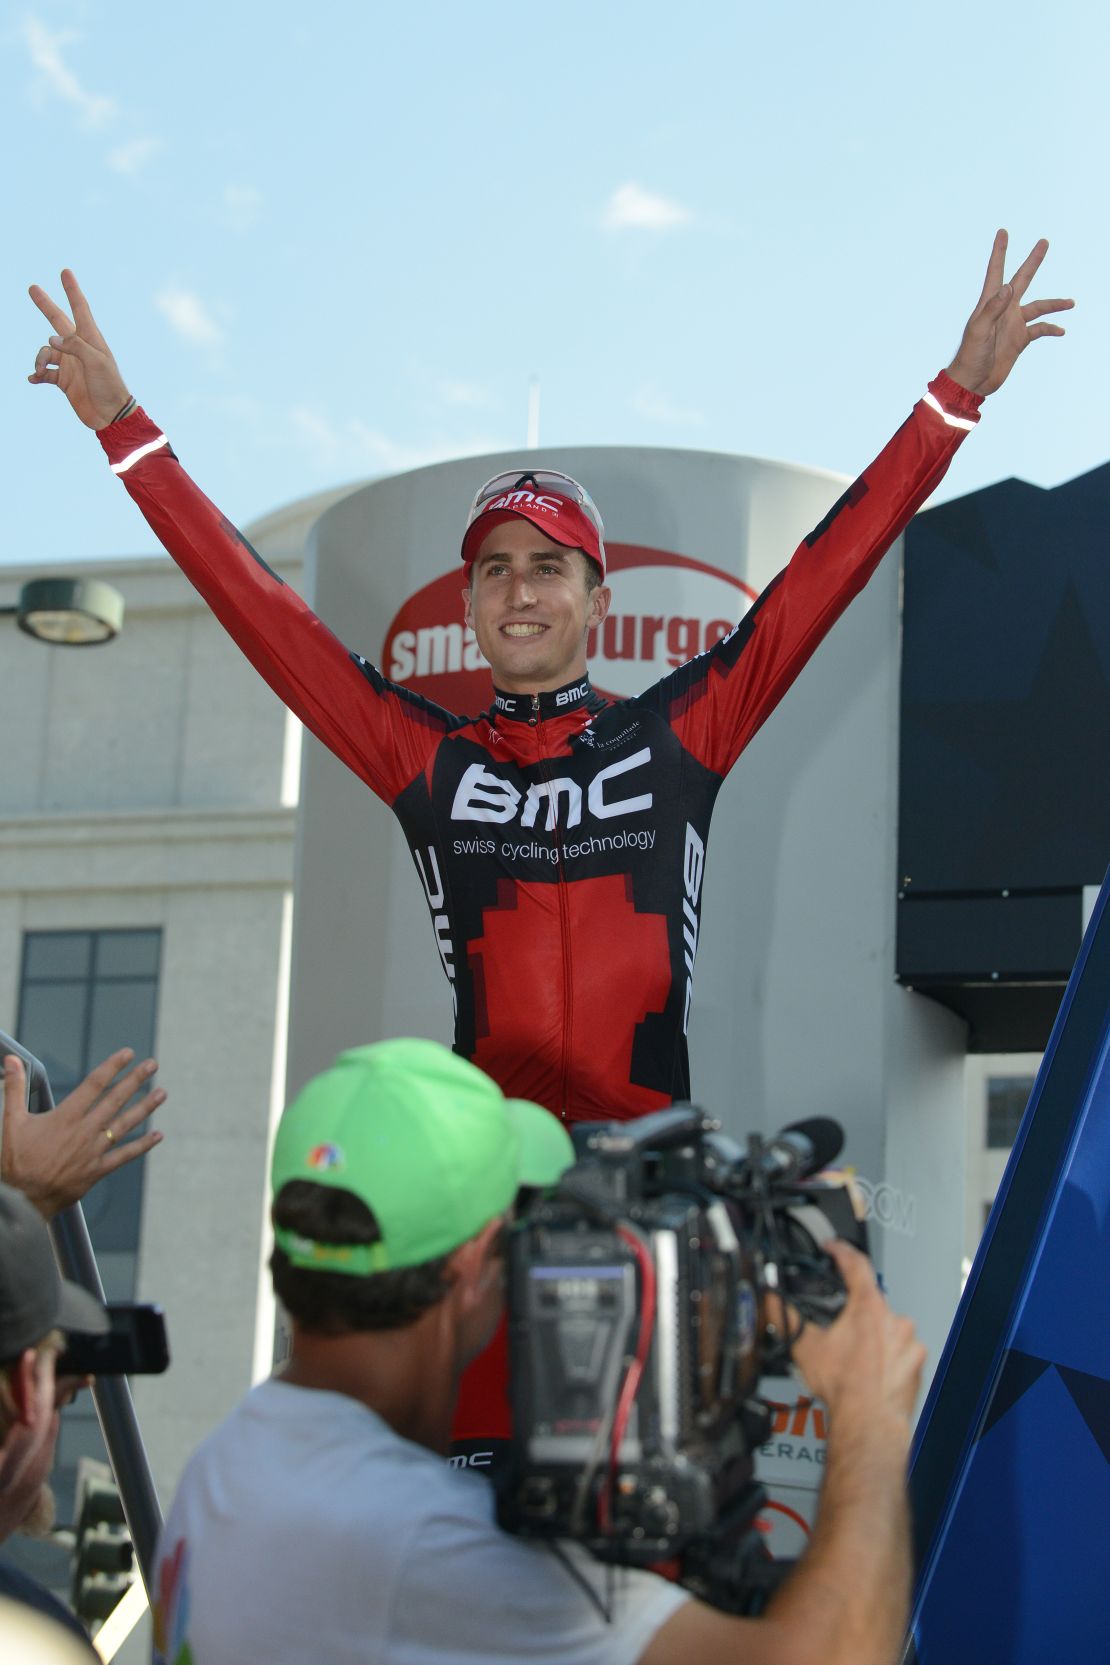 Another rising U.S. cycling star is Taylor Phinney, who like van Garderen is a member of the BMC team.